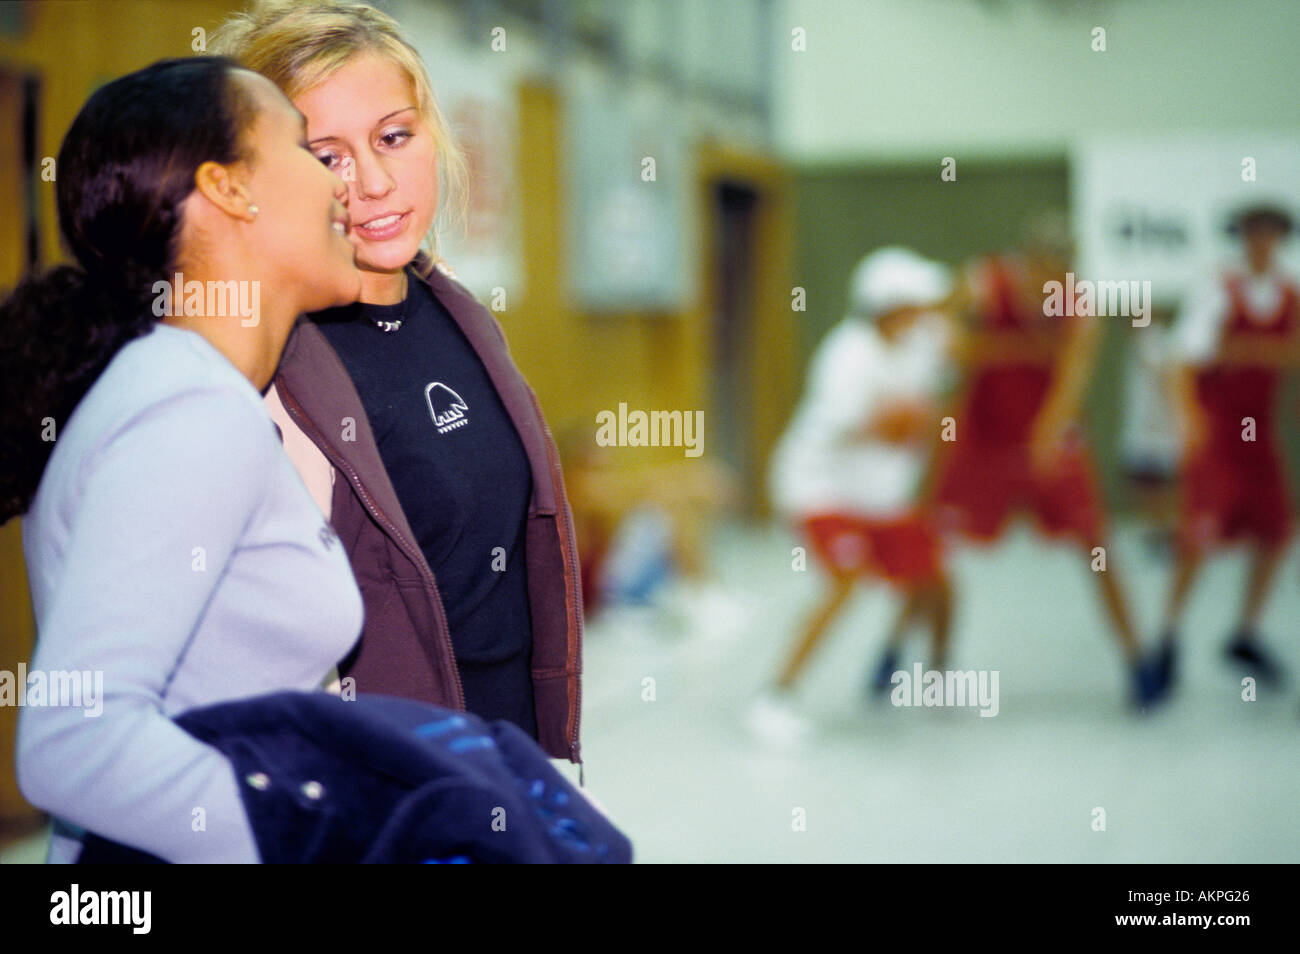 Germany Free time Two young women in a gymnasium  Stock Photo